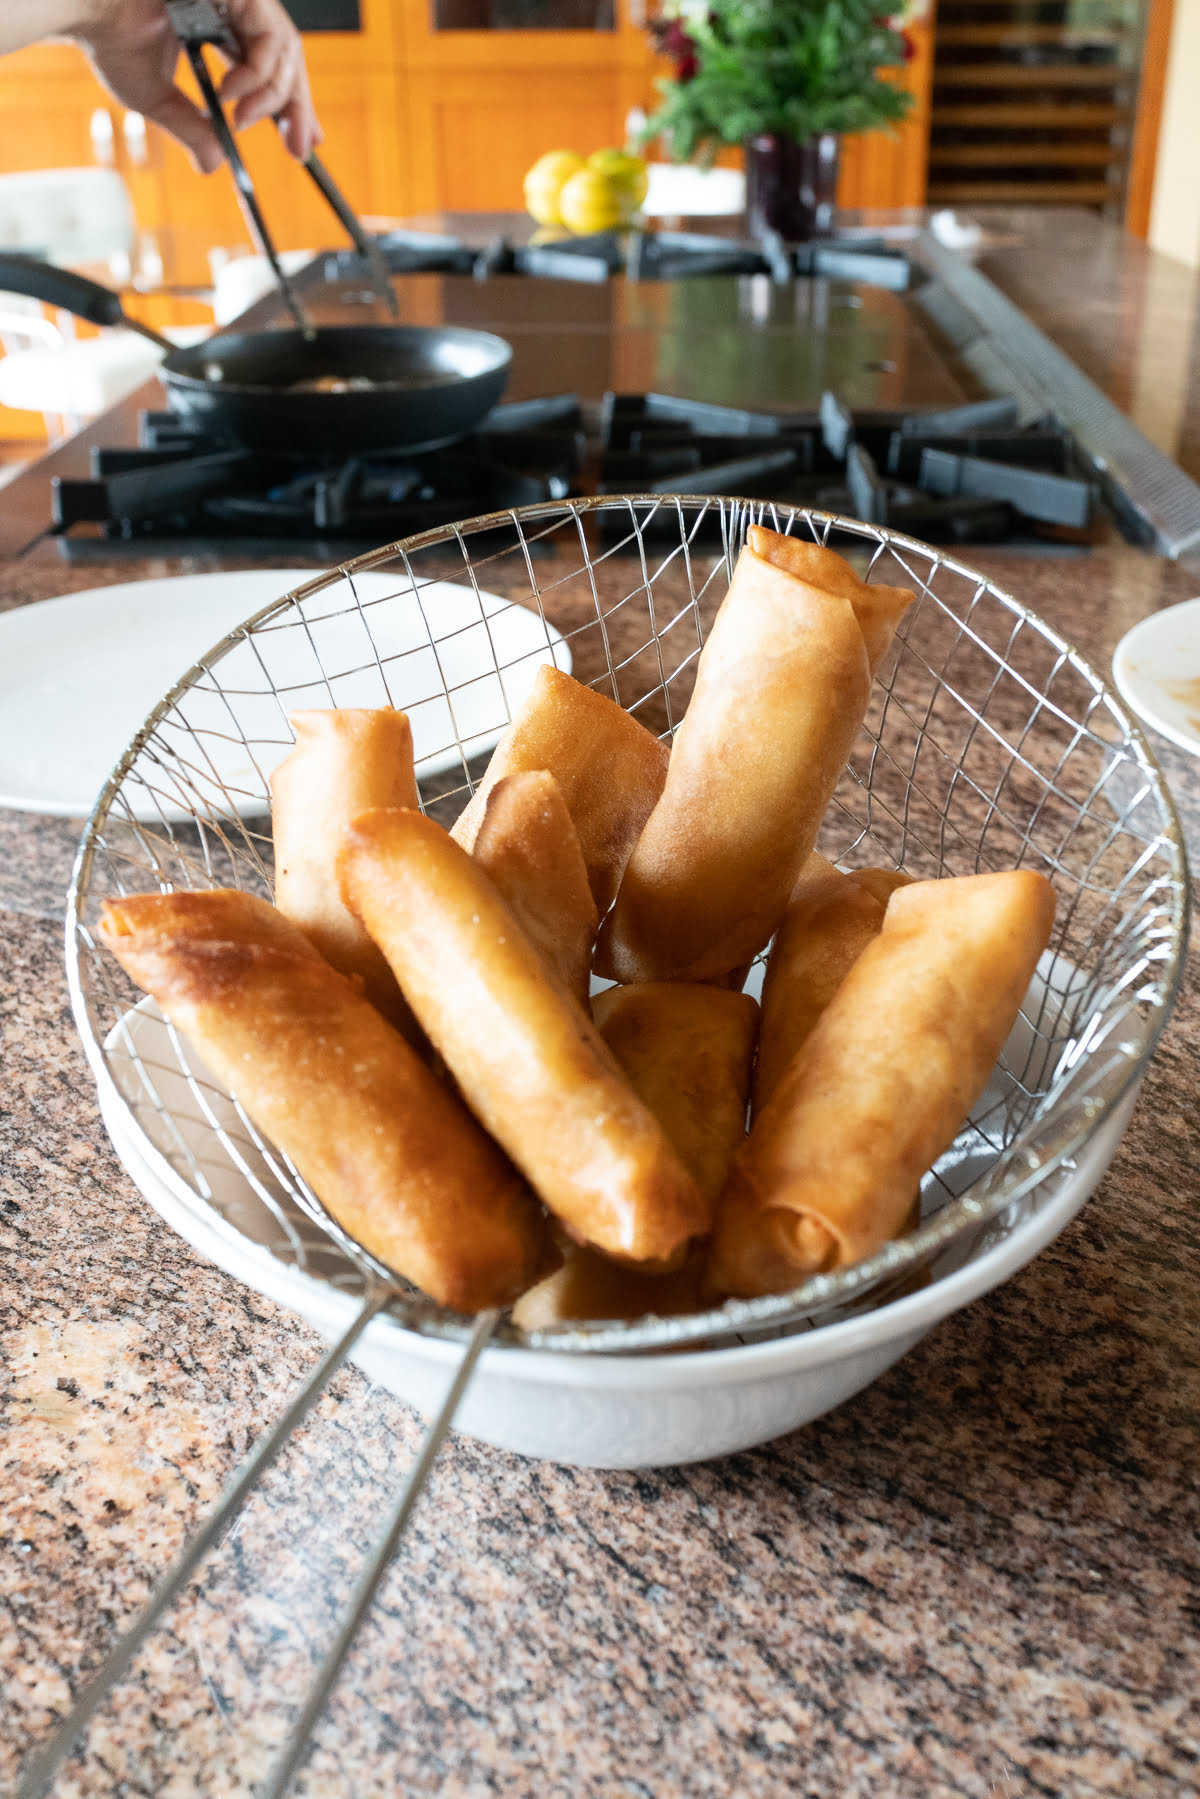 A batch of banana lumpia straight from the fryer, hot and fresh.